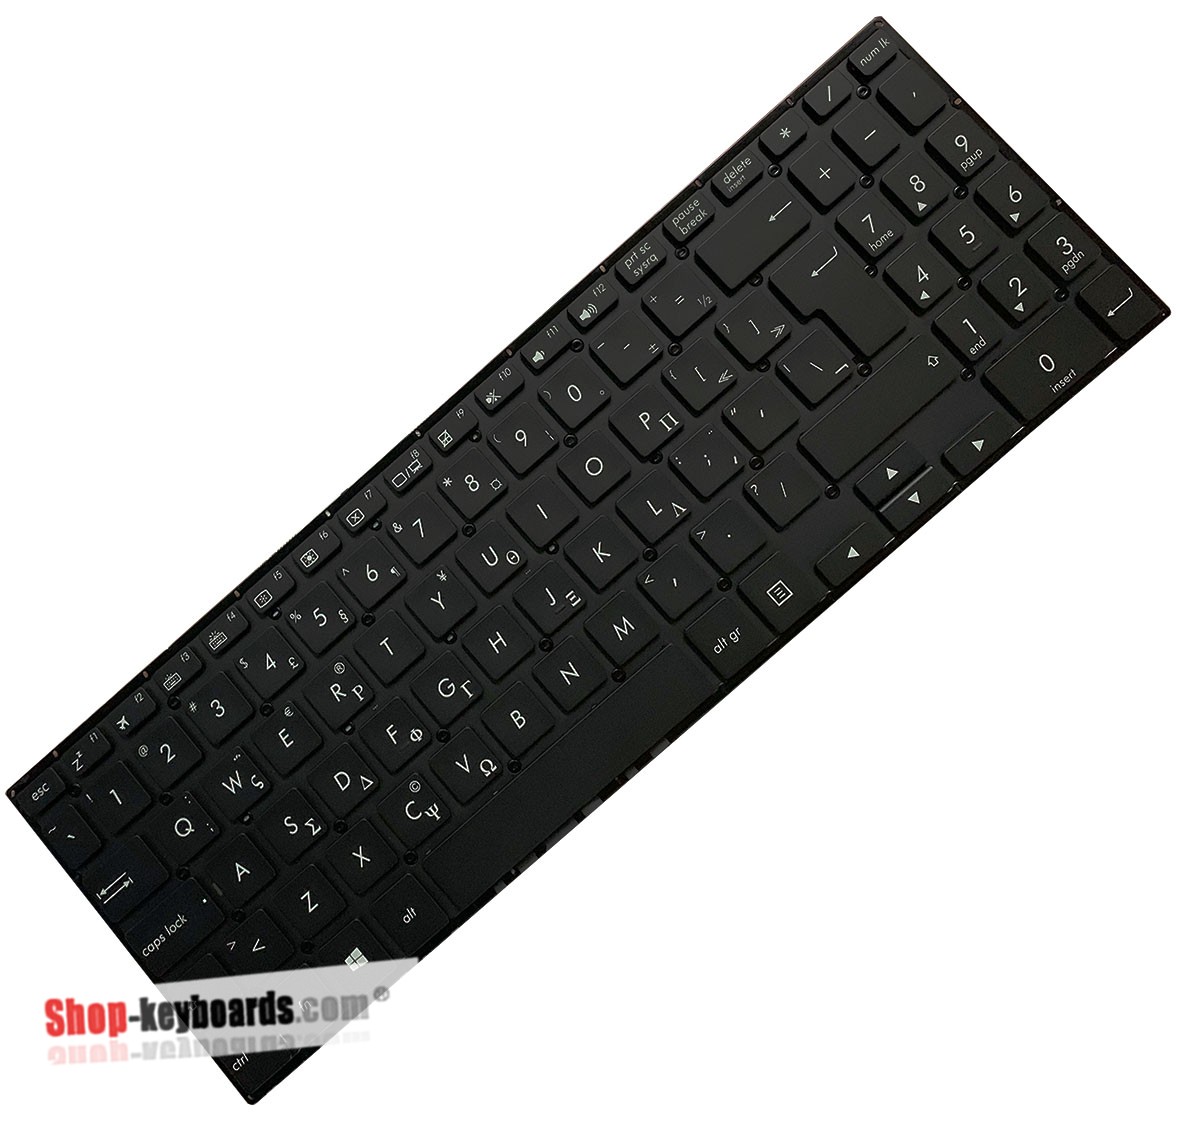 Asus 0KNB0-5130US00 Keyboard replacement